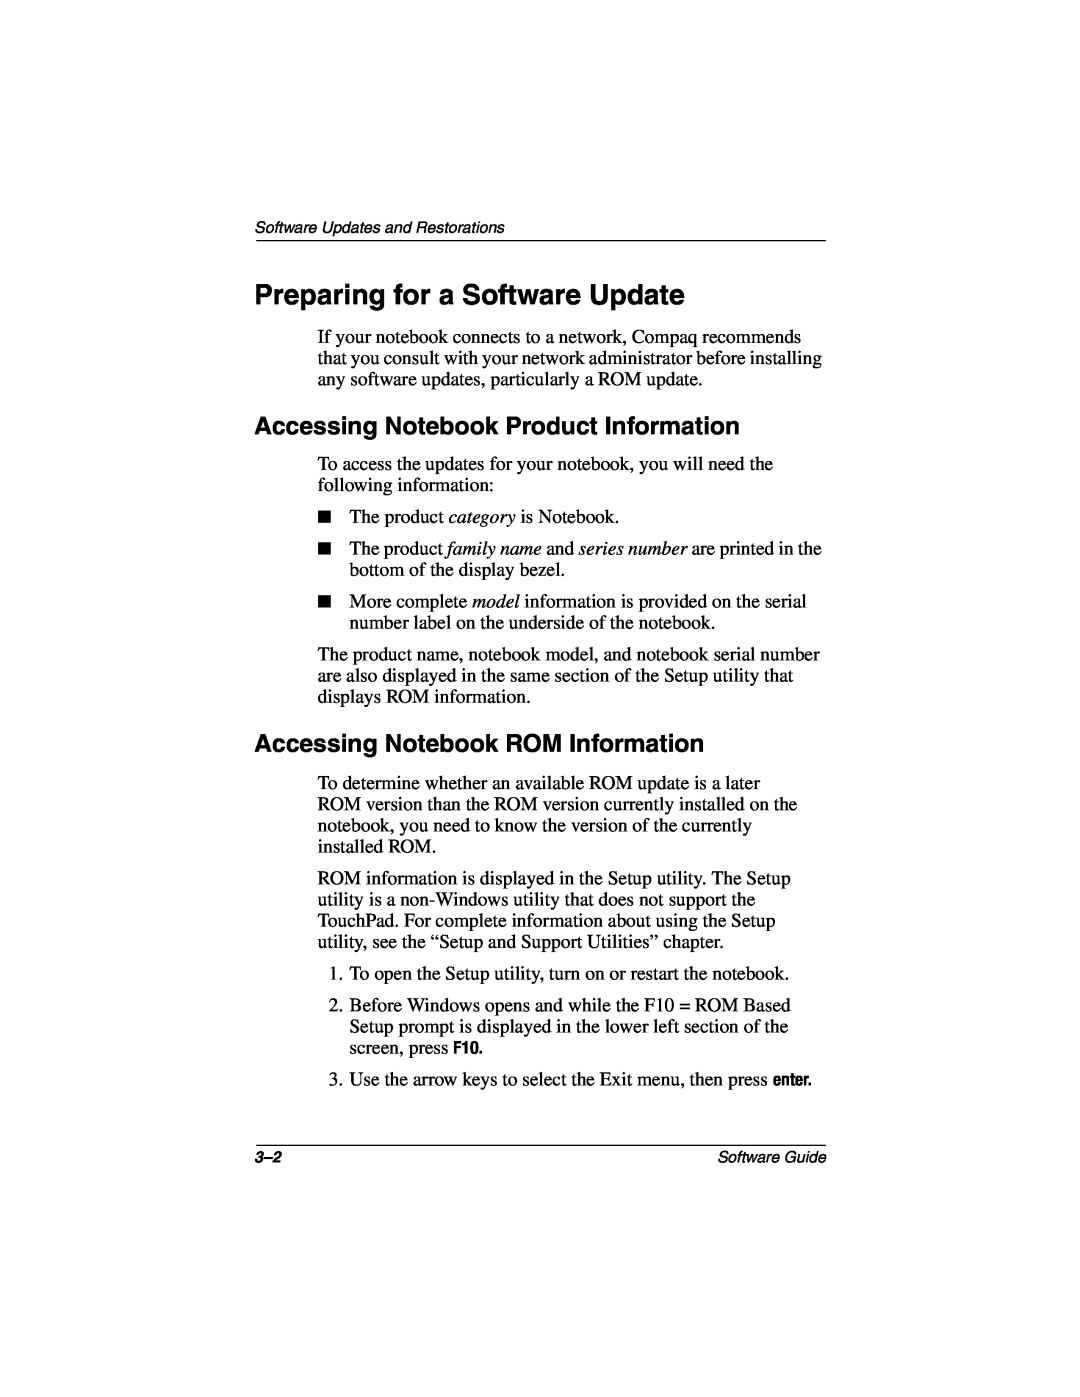 HP 3016US Preparing for a Software Update, Accessing Notebook Product Information, Accessing Notebook ROM Information 